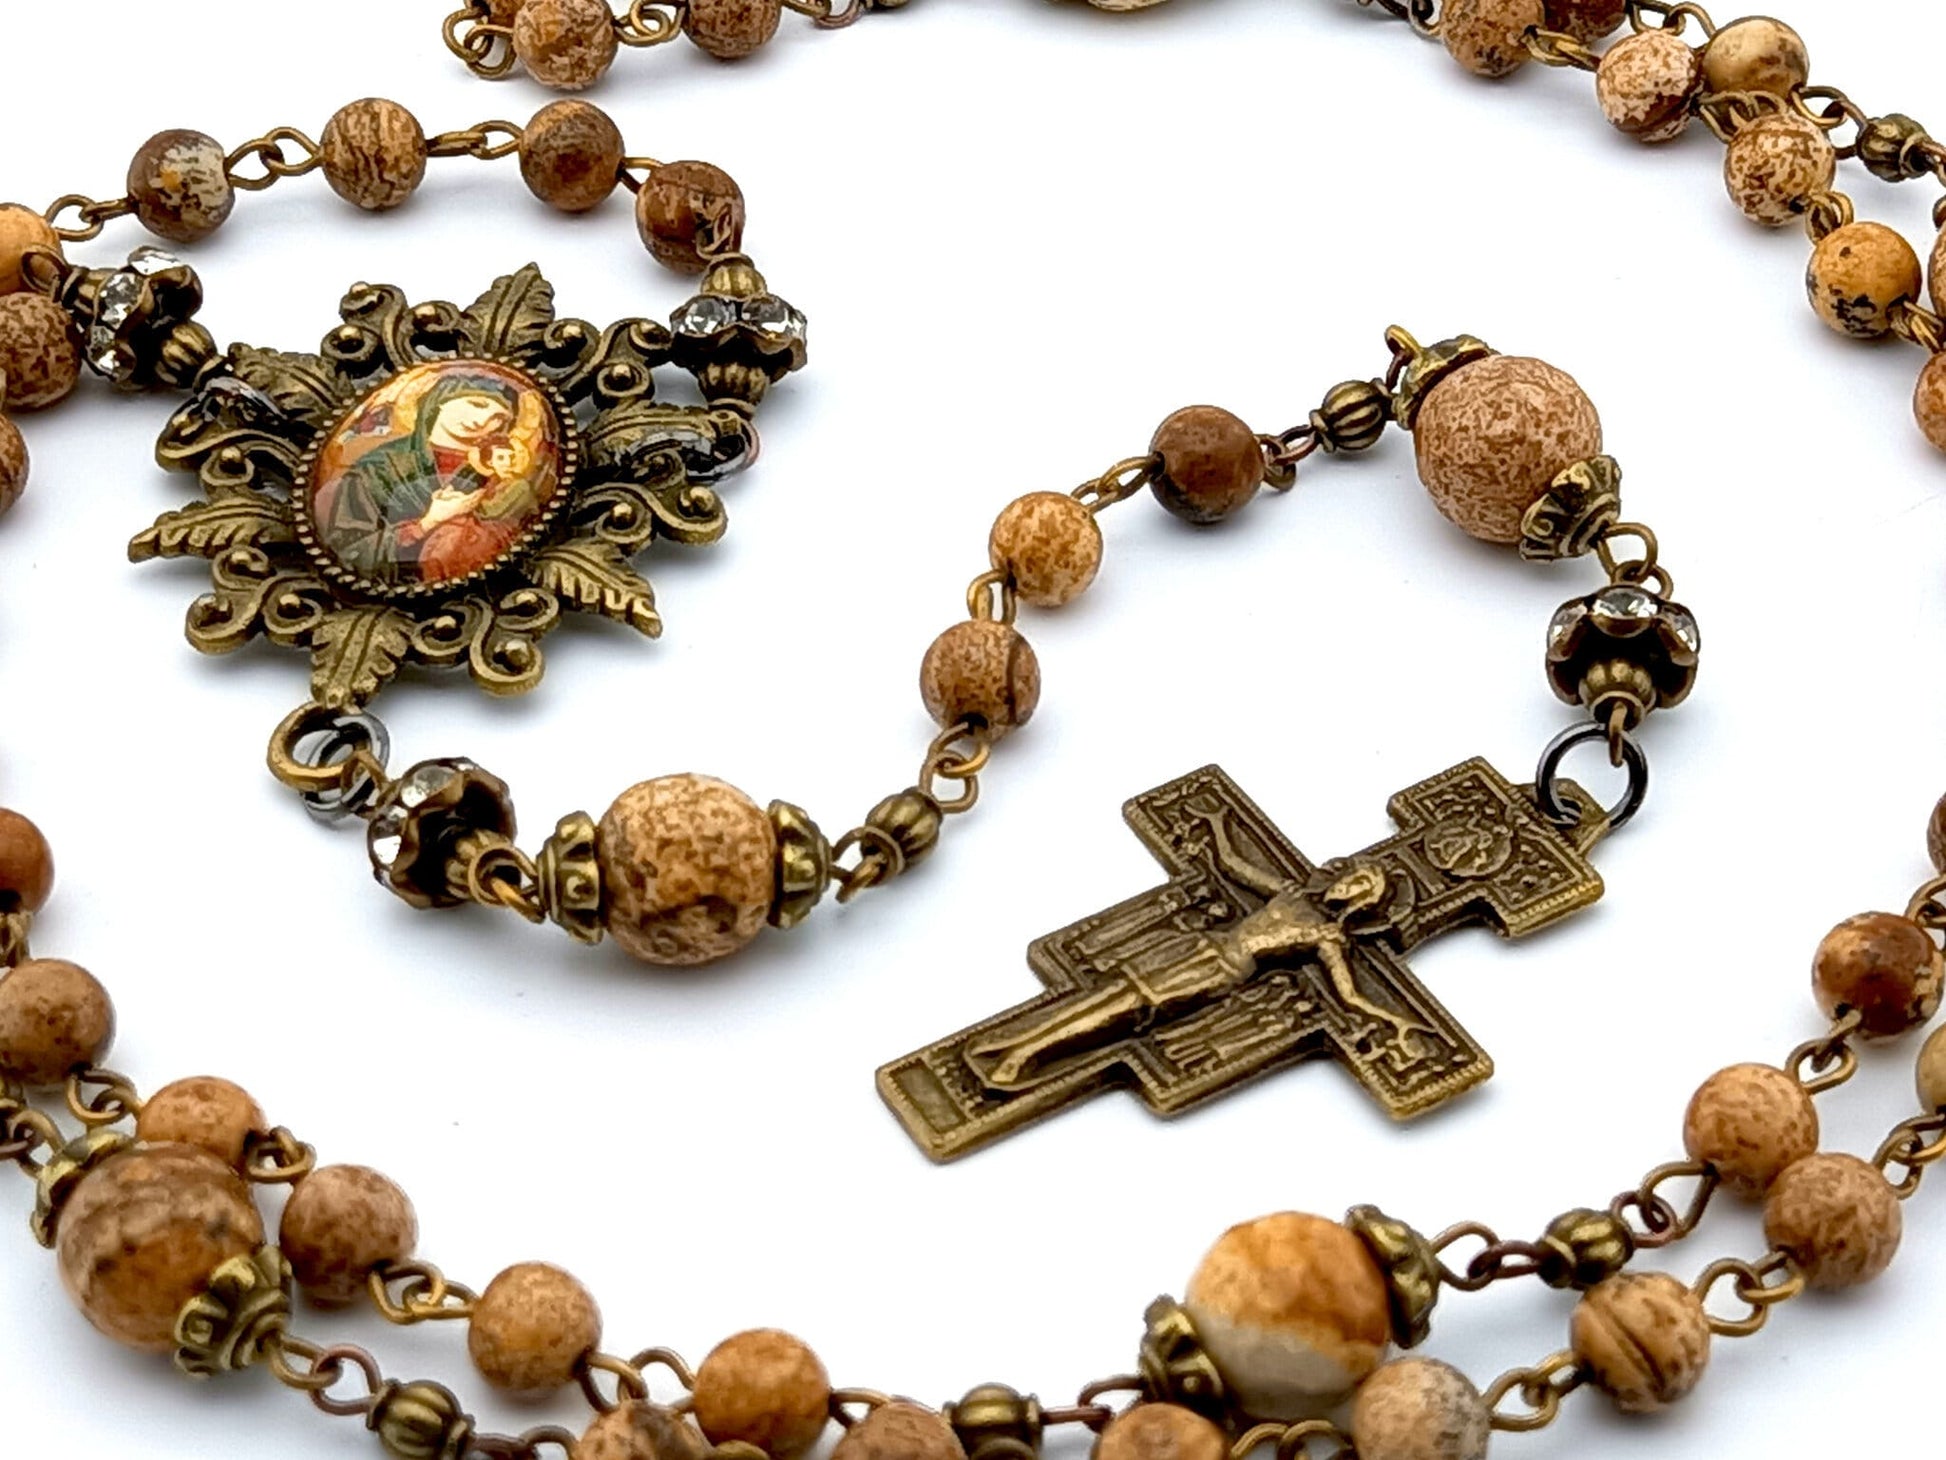 Our Lady of Perpetual Succour unique rosary beads with brown jasper gemstone beads, bronze Saint Francis crucifix and picture centre medal.